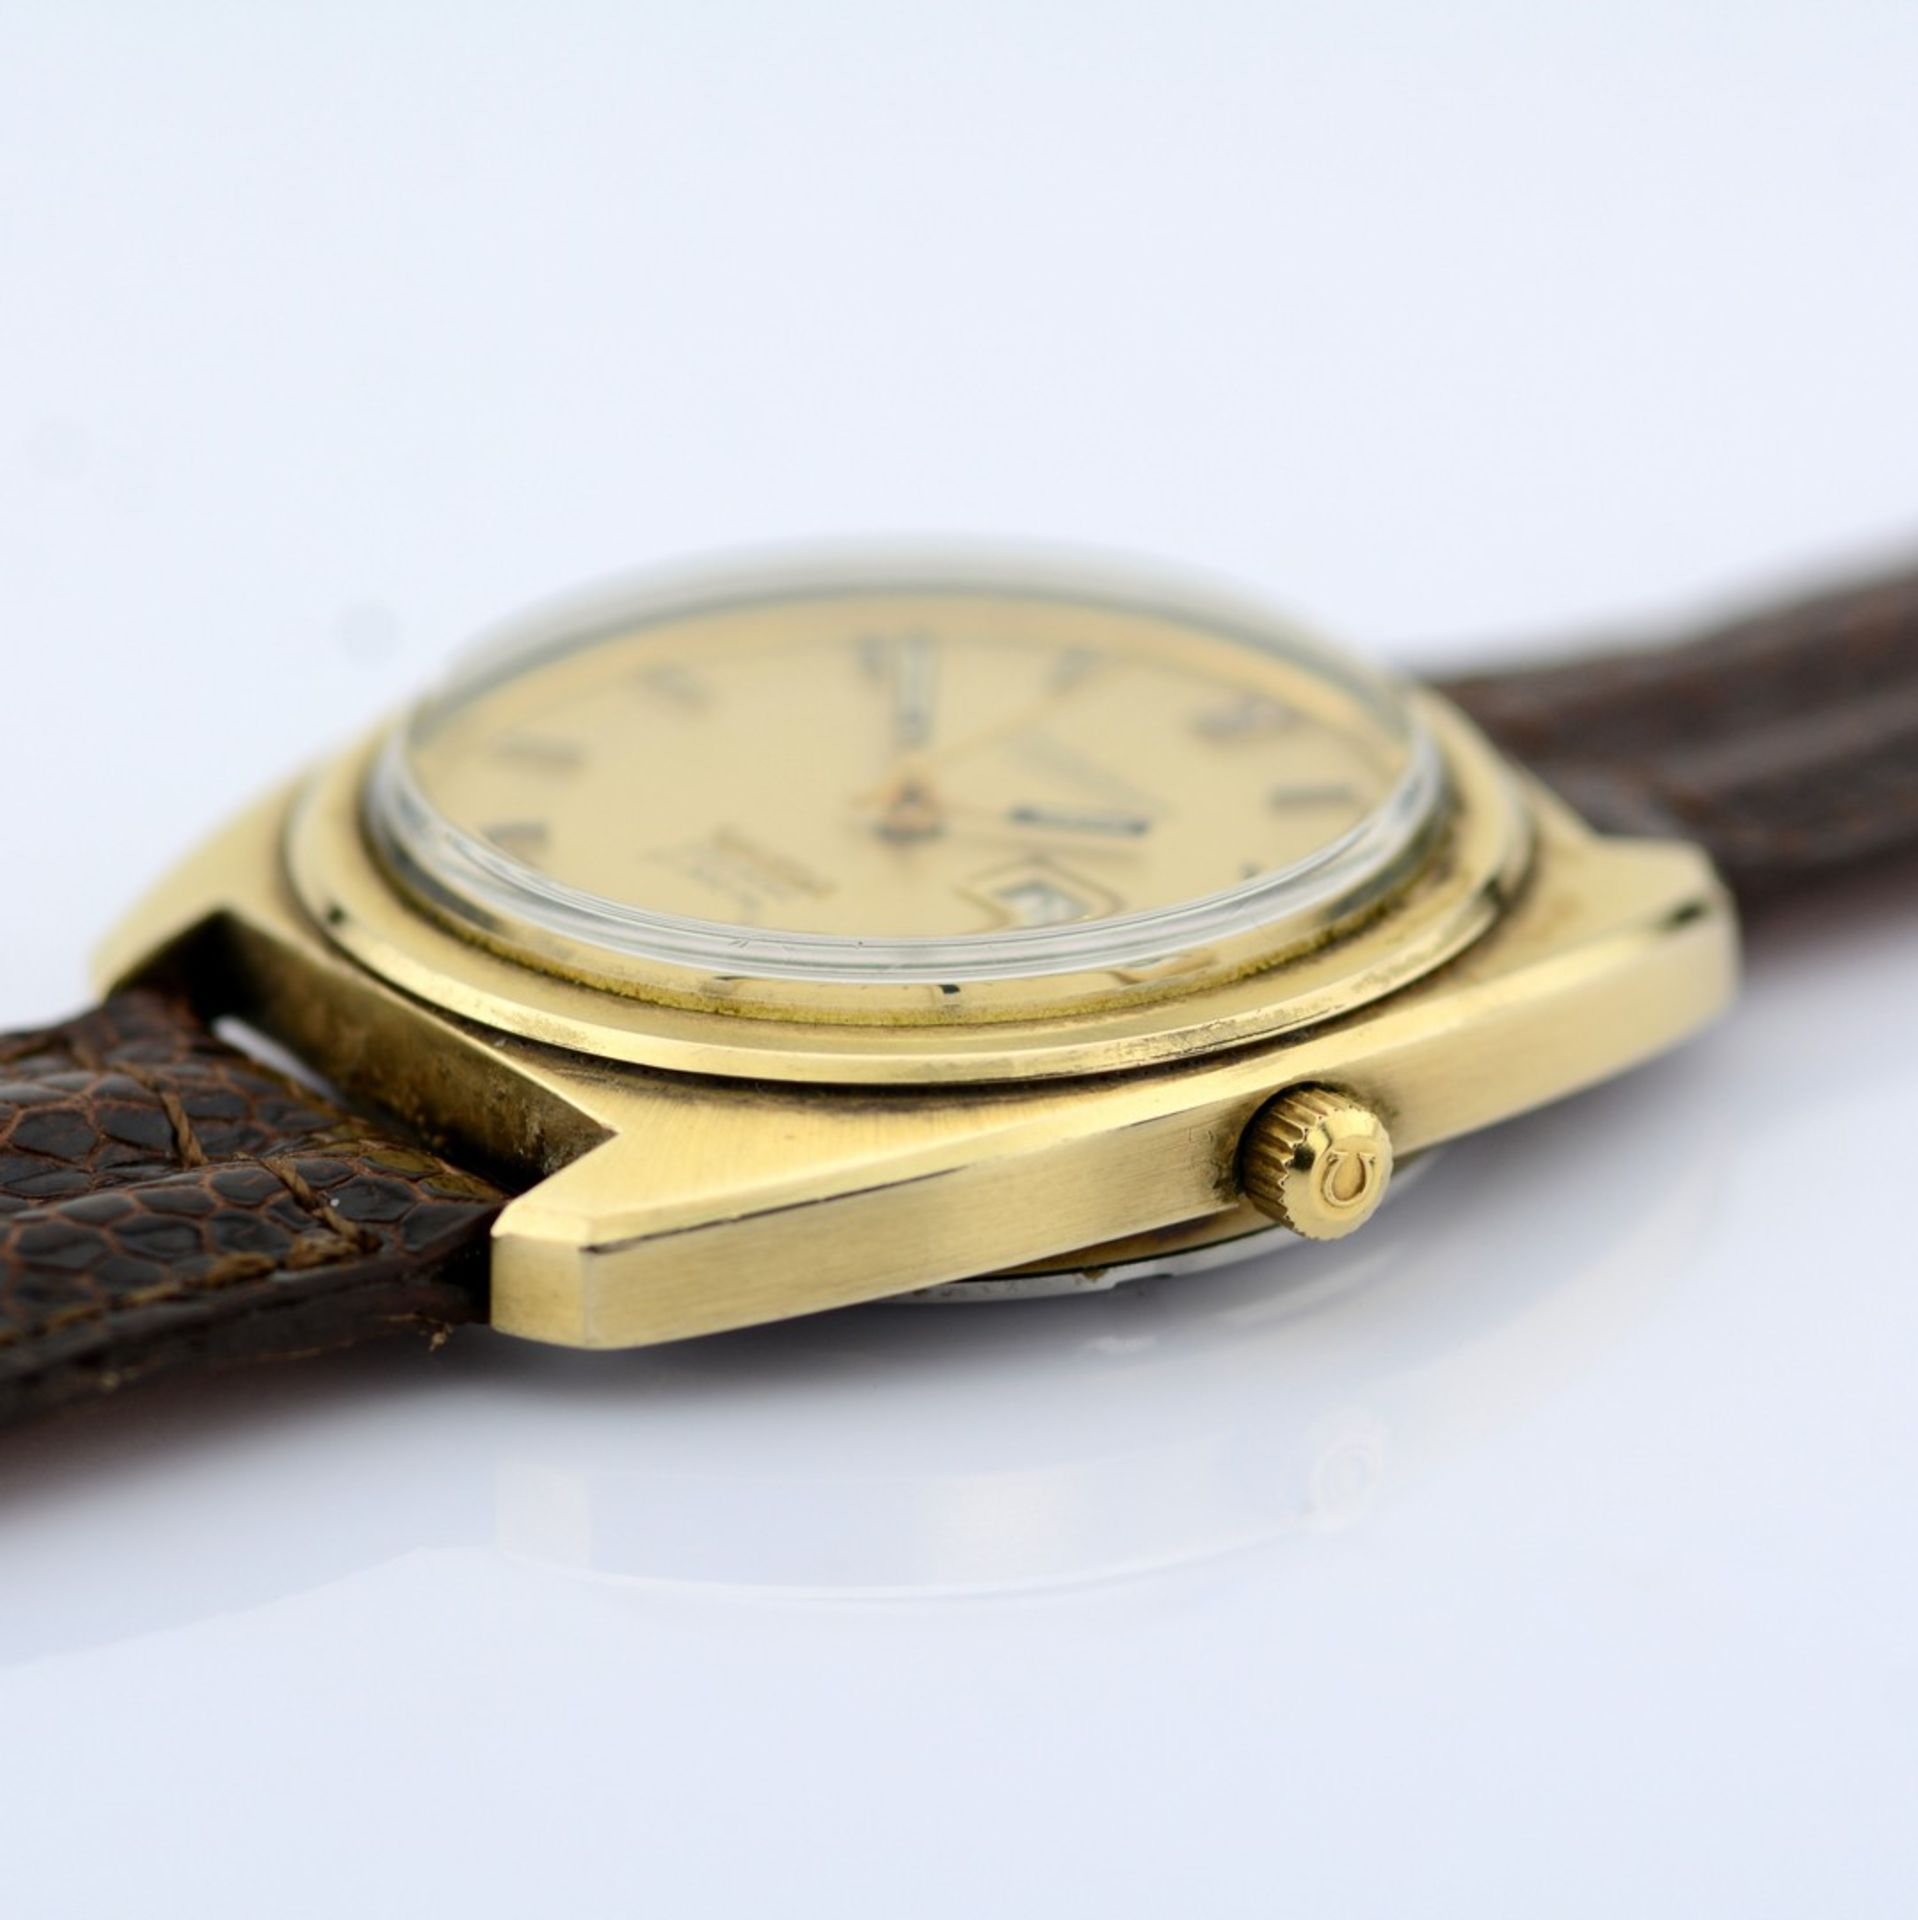 Omega / Constellation Chronometer Electronic F300 Day-Date - Gentlemen's Gold/Steel Wristwatch - Image 6 of 8